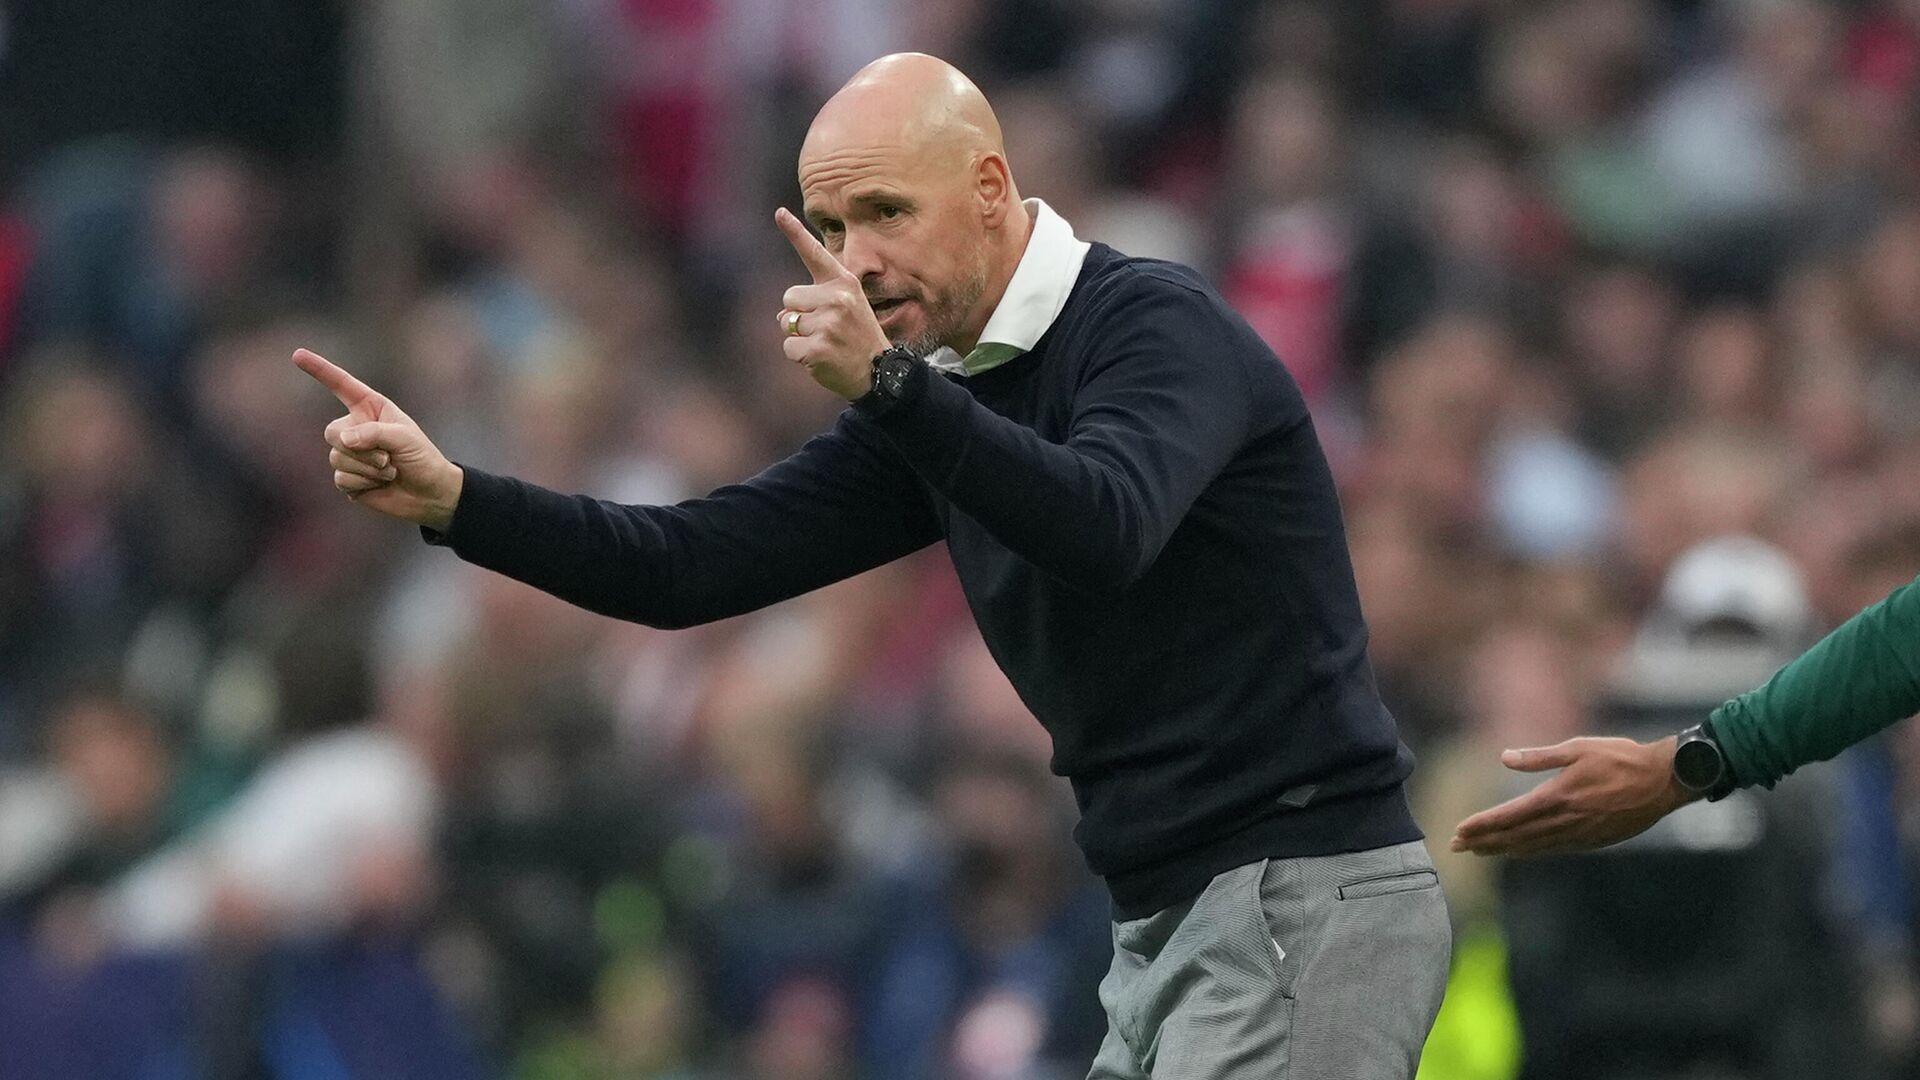 Ajax's head coach Erik ten Hag gives instructions from the side line during the Champions League group C soccer match between Ajax and Besiktas at the Johan Cruyff ArenA in Amsterdam in Amsterdam, Netherlands, Tuesday, Sept. 28, 2021 - Sputnik International, 1920, 26.04.2022